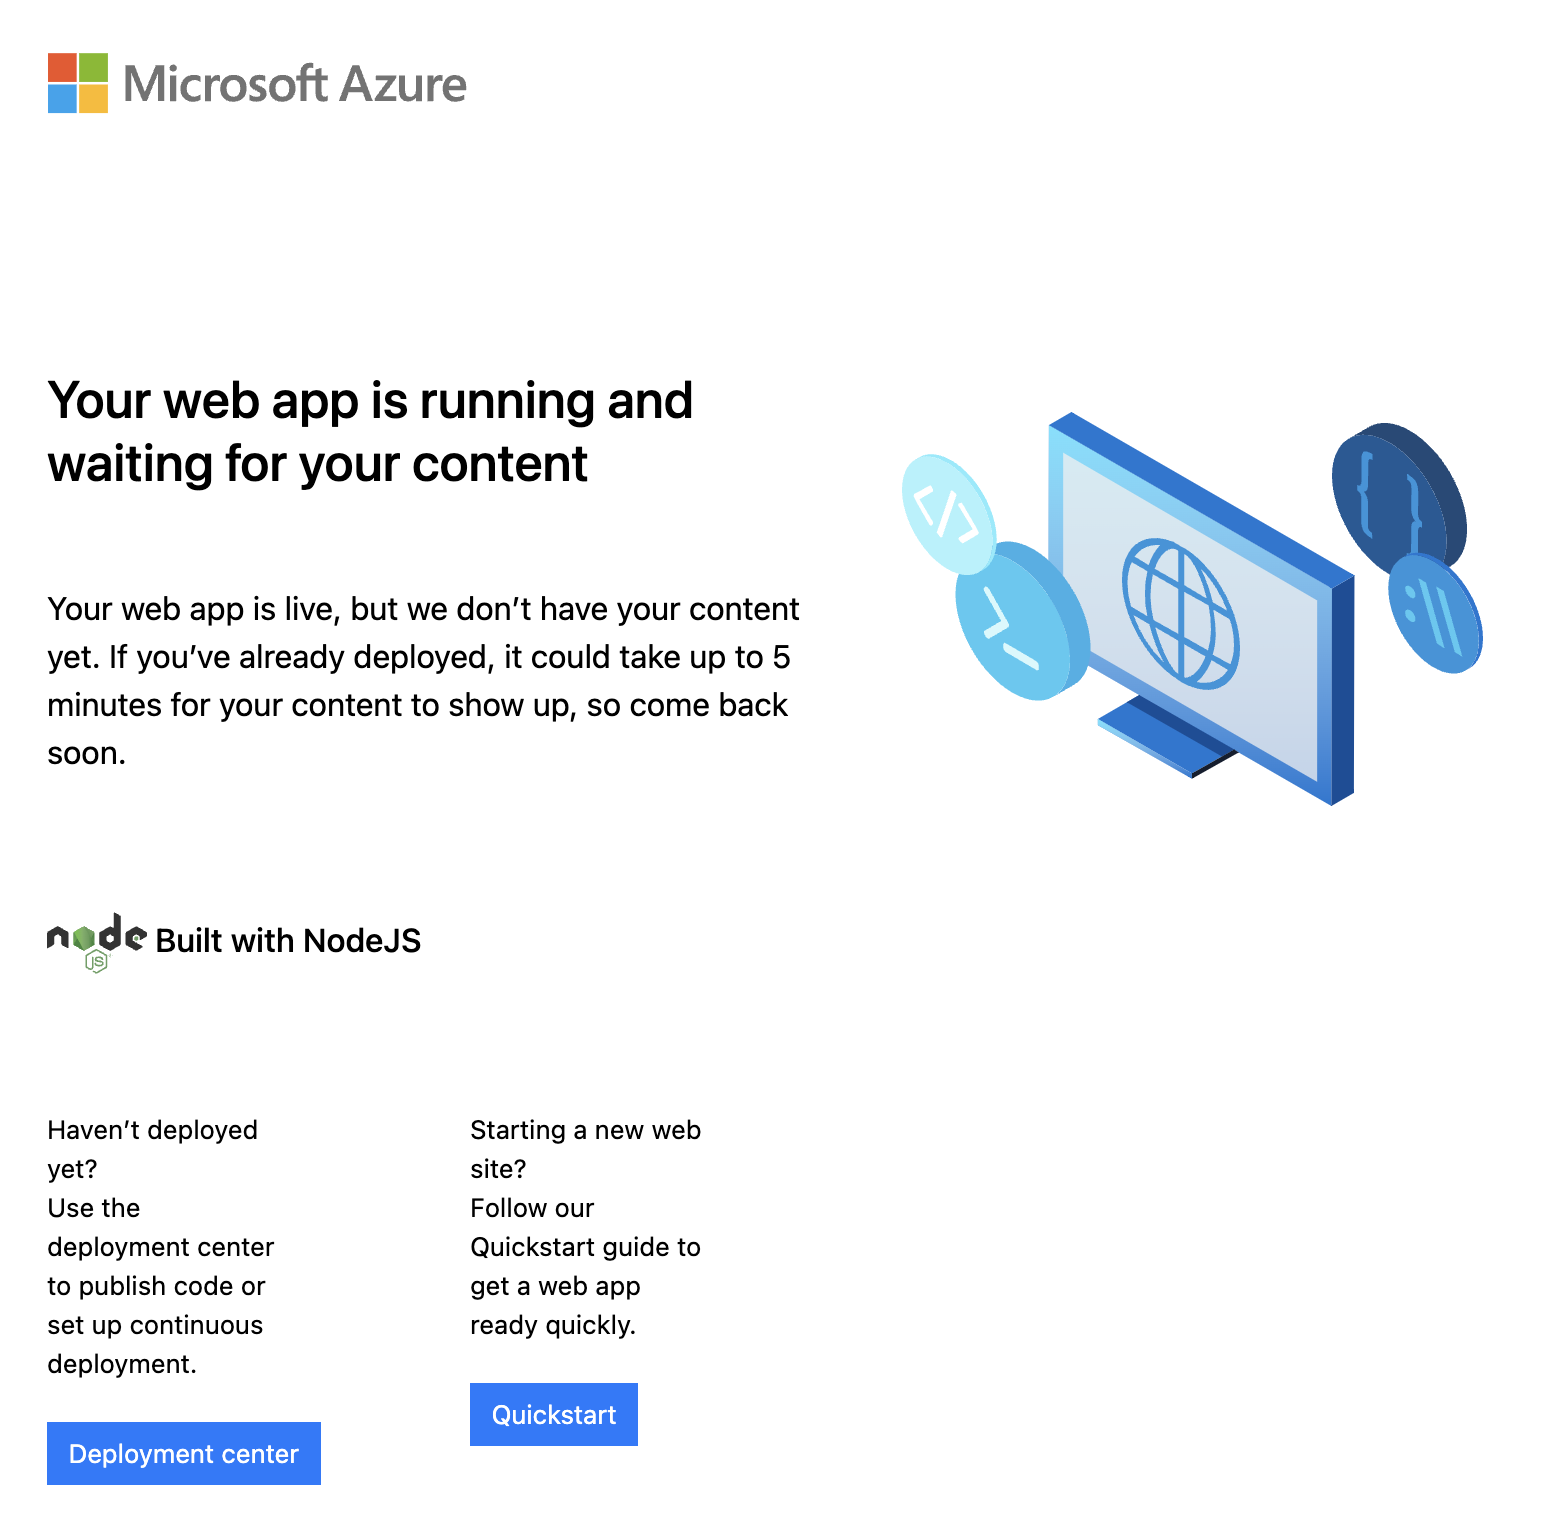 Application running in Azure and waiting for content